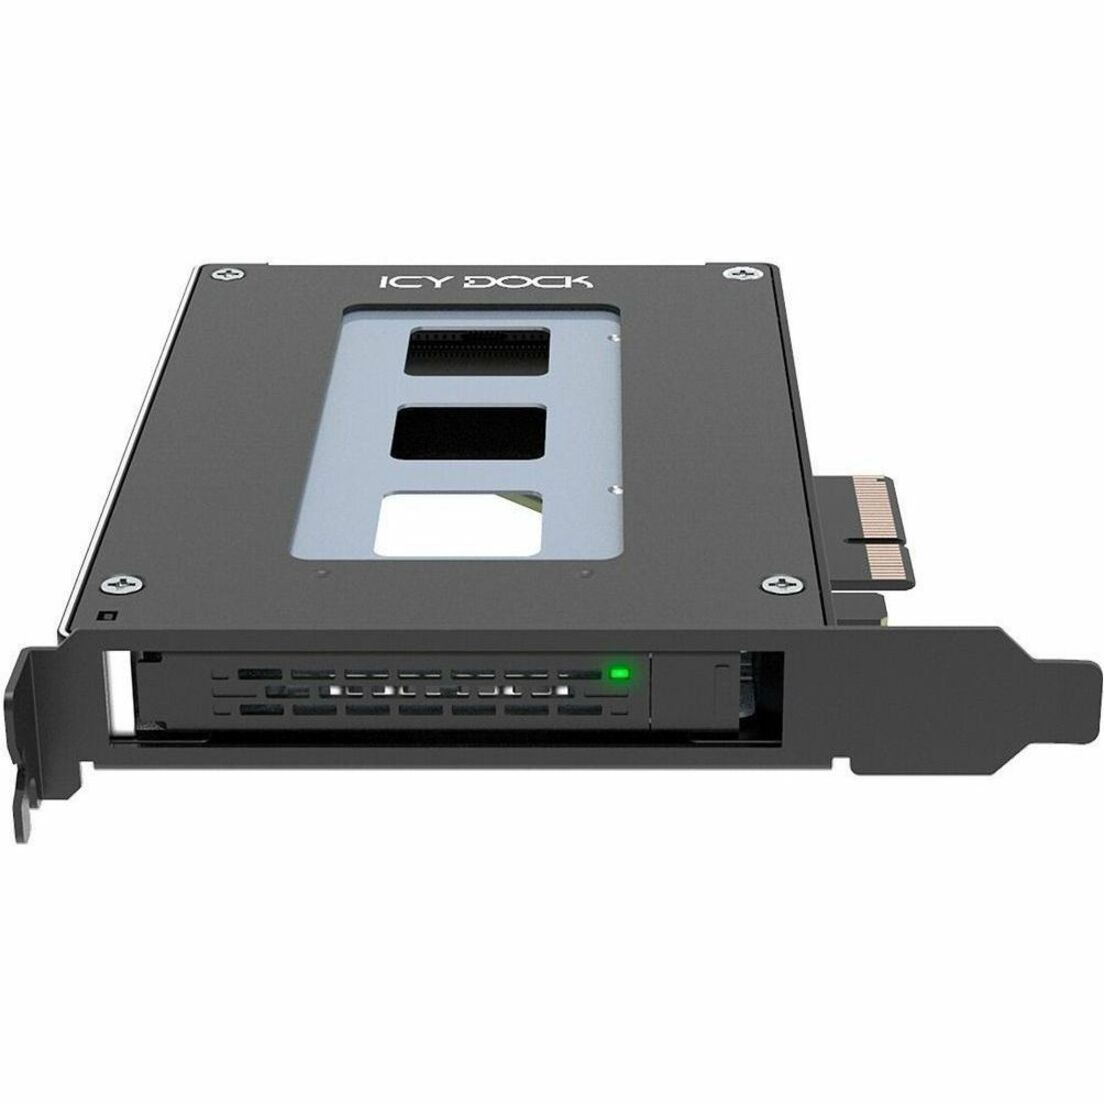 Icy Dock MB111VP-B U.2 NVMe SSD to PCIe 4.0 x4 Mobile Rack for PCIe Expansion Slot, 3 Year Warranty, 64 Gbit/s Data Transfer Rate